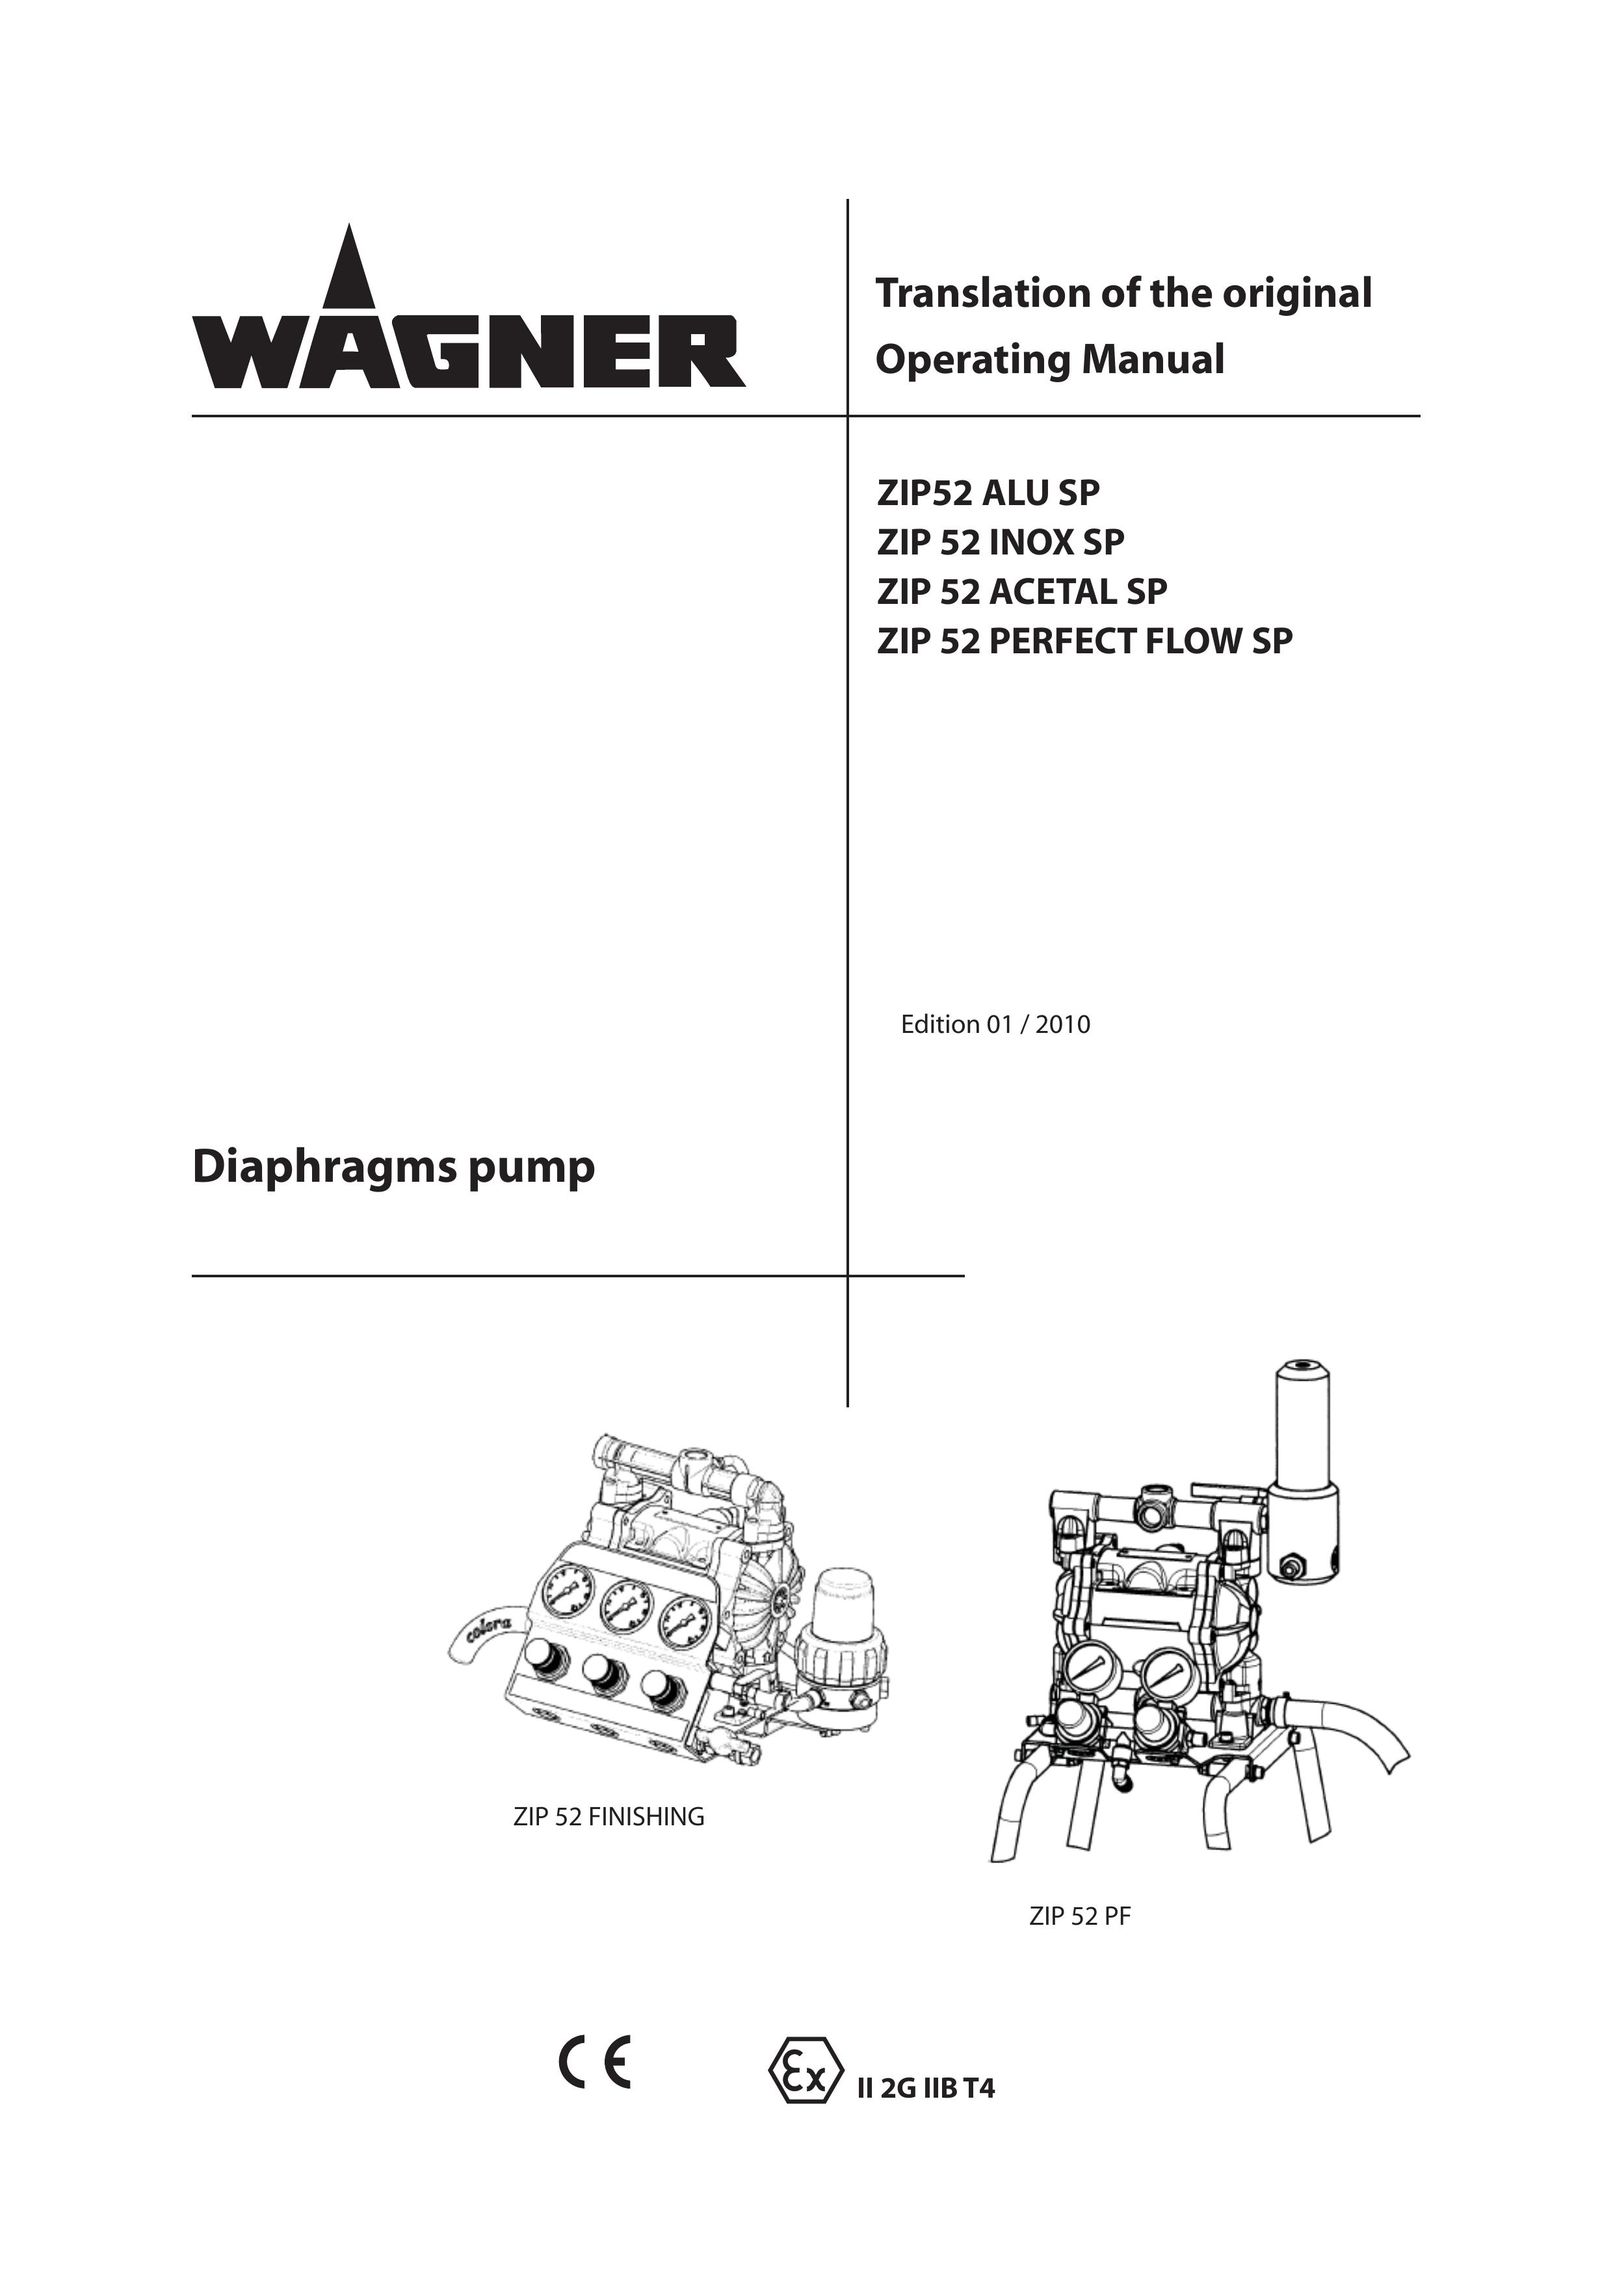 Wagner SprayTech Zzb012eng Septic System User Manual